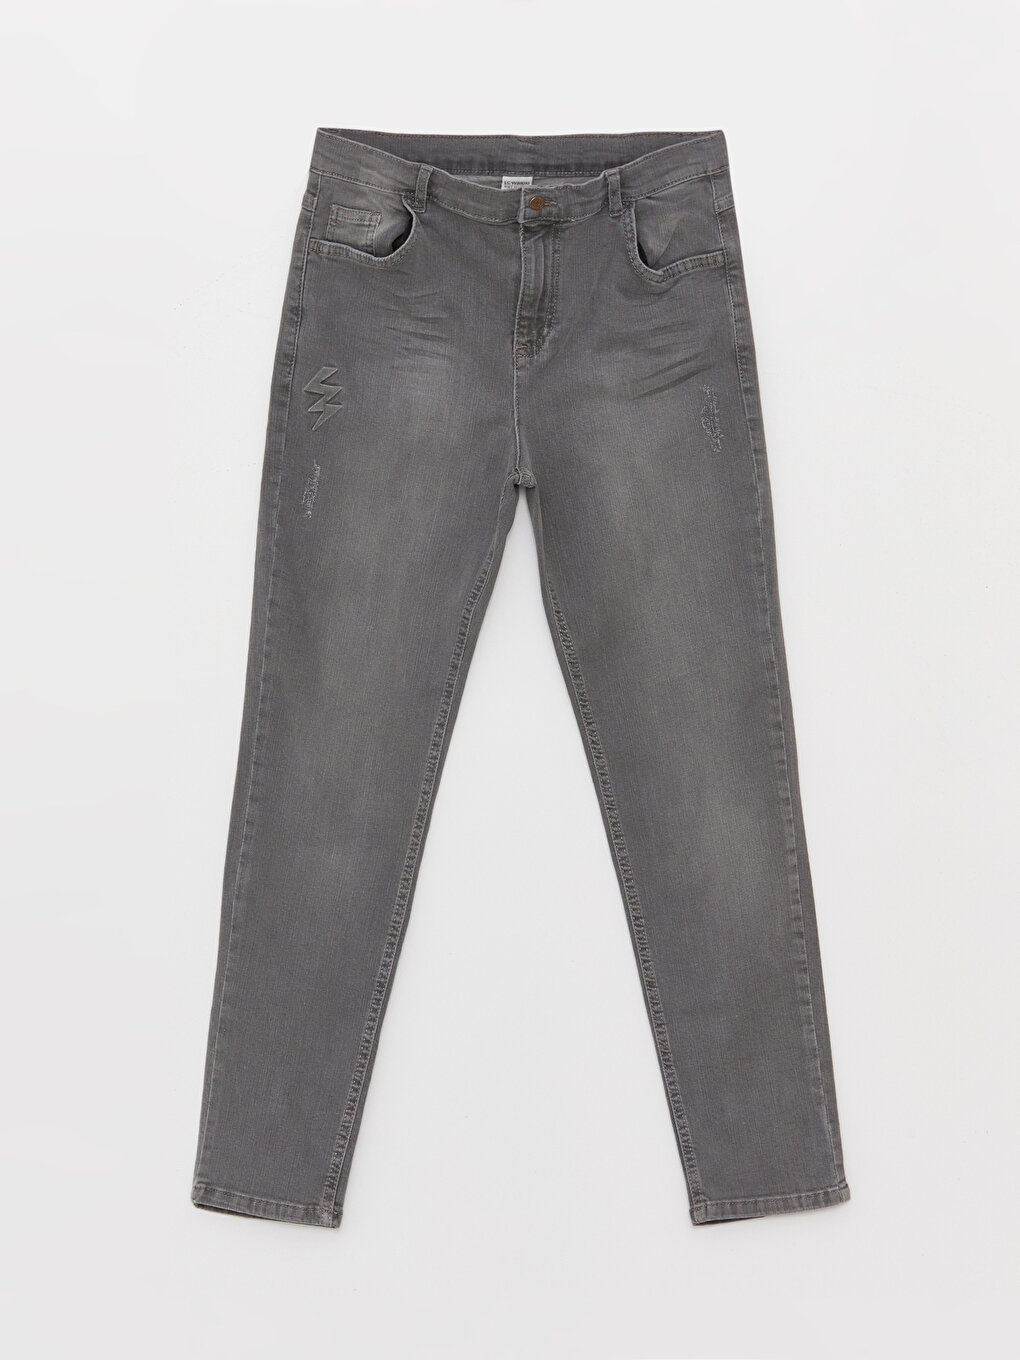 Mayoral - Girls Grey Cotton Super-Skinny Trousers | Childrensalon Outlet